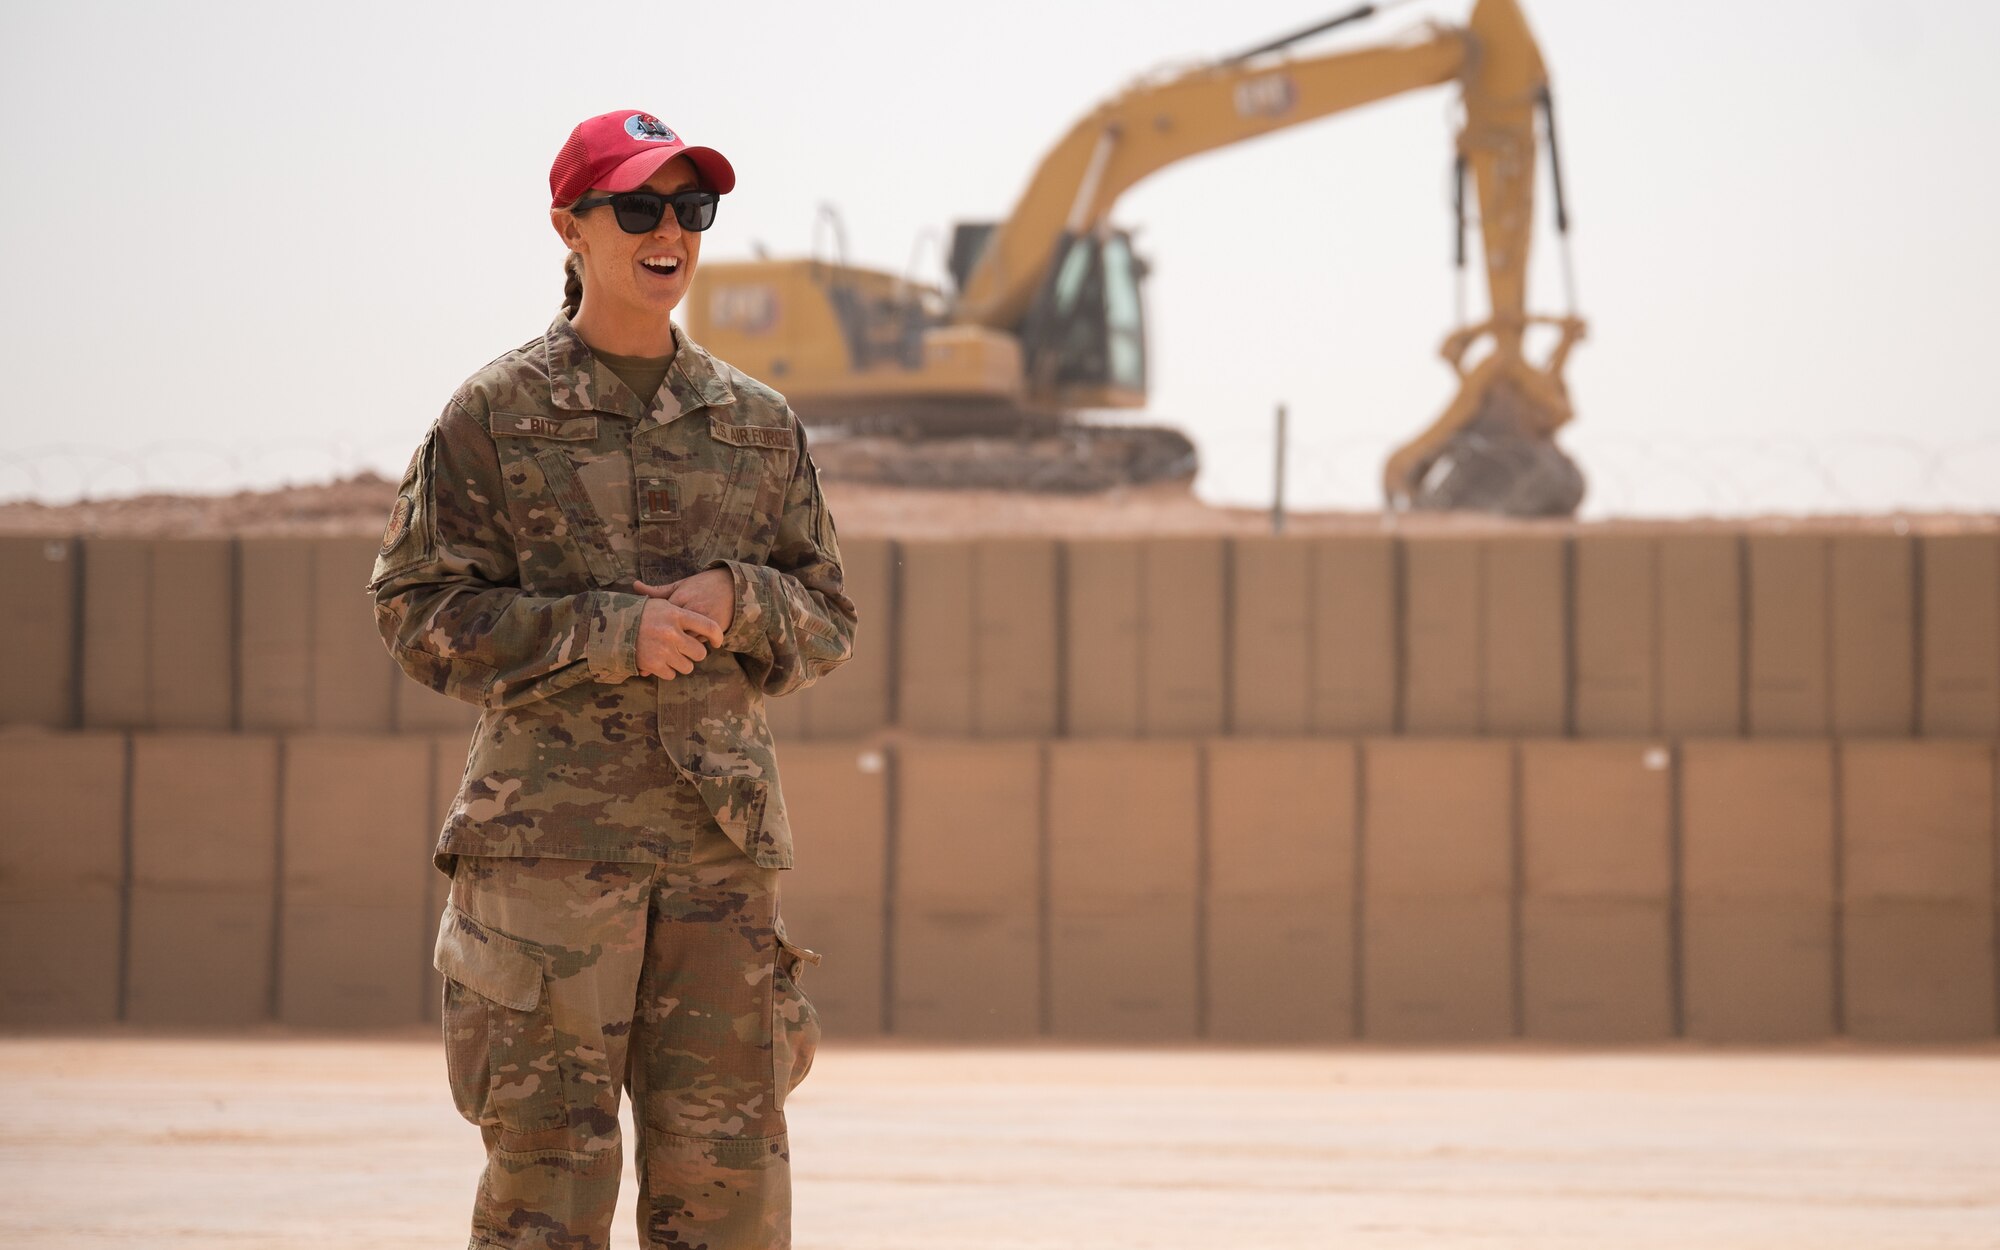 Capt. Ericka Bitz, 557th Expeditionary Red Horse Squadron officer-in-charge, addresses the crowd at a munitions storage area expansion ribbon cutting ceremony at Prince Sultan Air Base, Kingdom of Saudi Arabia, March 16, 2022. The expansion of the munitions storage area greatly increases the lethality of the U.S. Air Forces in the region by progressing the fortification of the base’s facilities and allowing more weapons to be safely stored at PSAB (U.S. Air Force photo by Senior Airman Jacob B. Wrightsman)